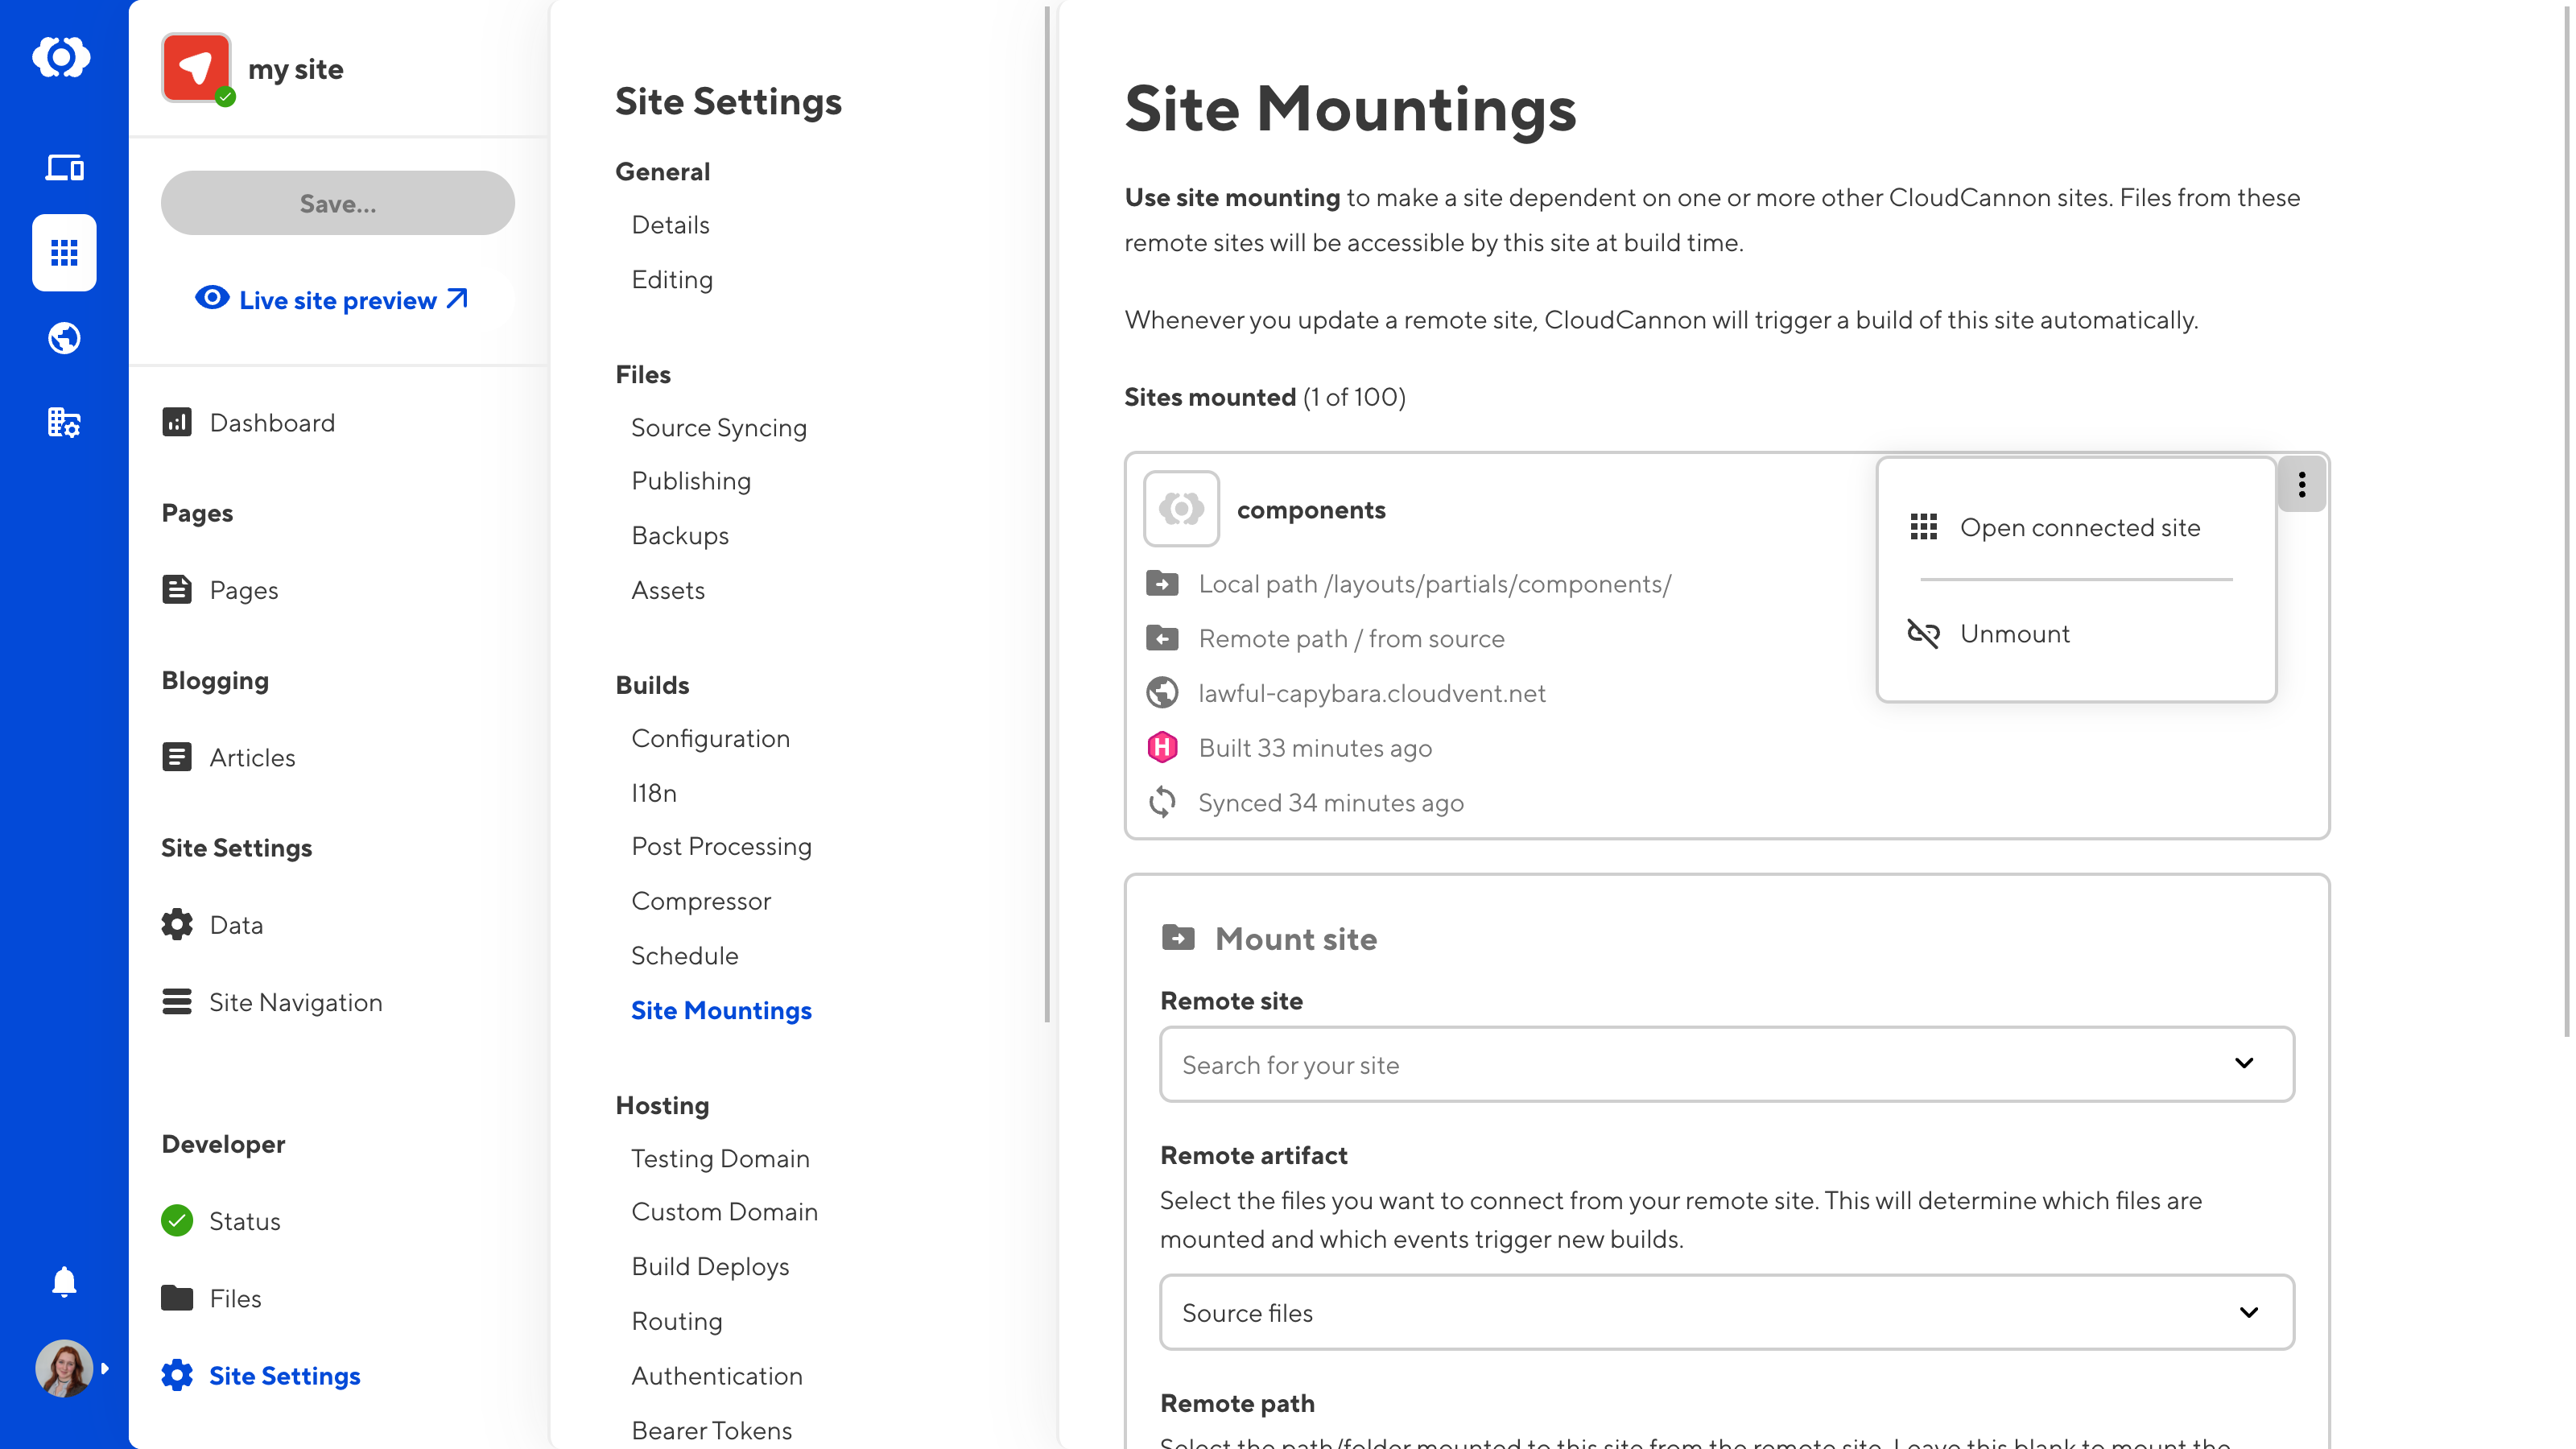 A screenshot of the CloudCannon app shows the Site Mountings page, with a context menu to unmount a site from the local site.